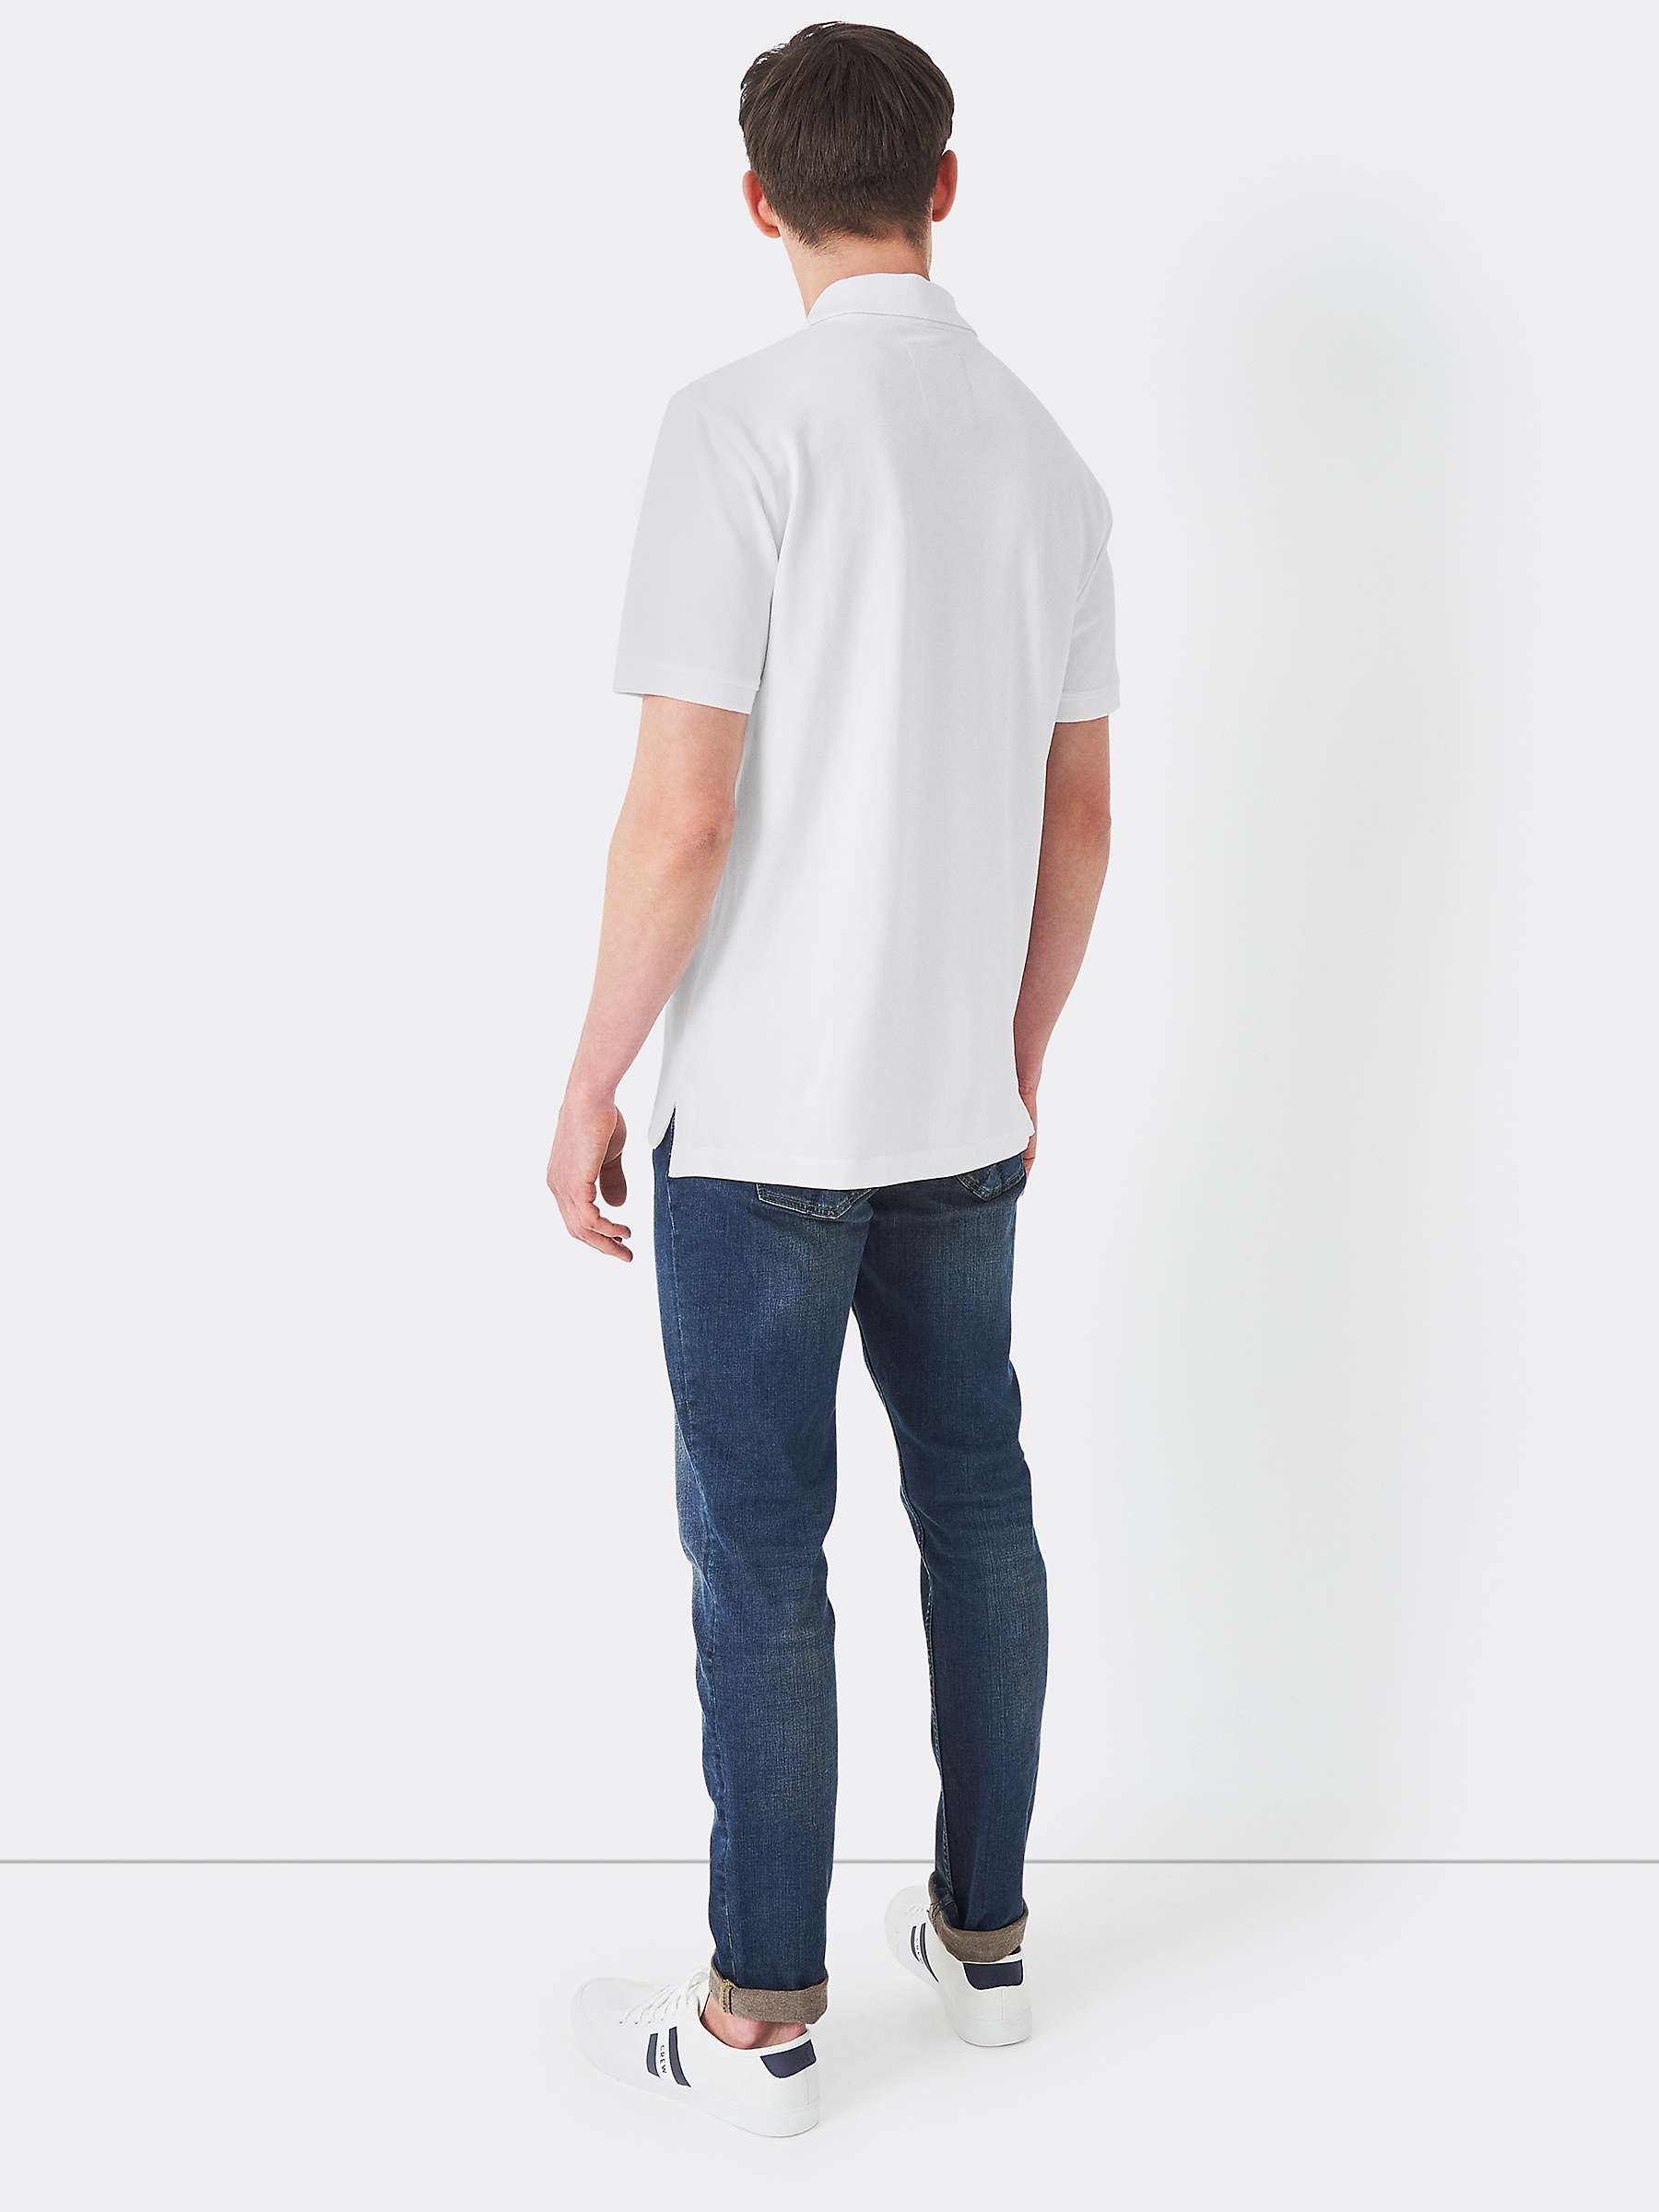 Buy Crew Clothing Stretch Pique Slim Fit Polo Shirt, White Online at johnlewis.com